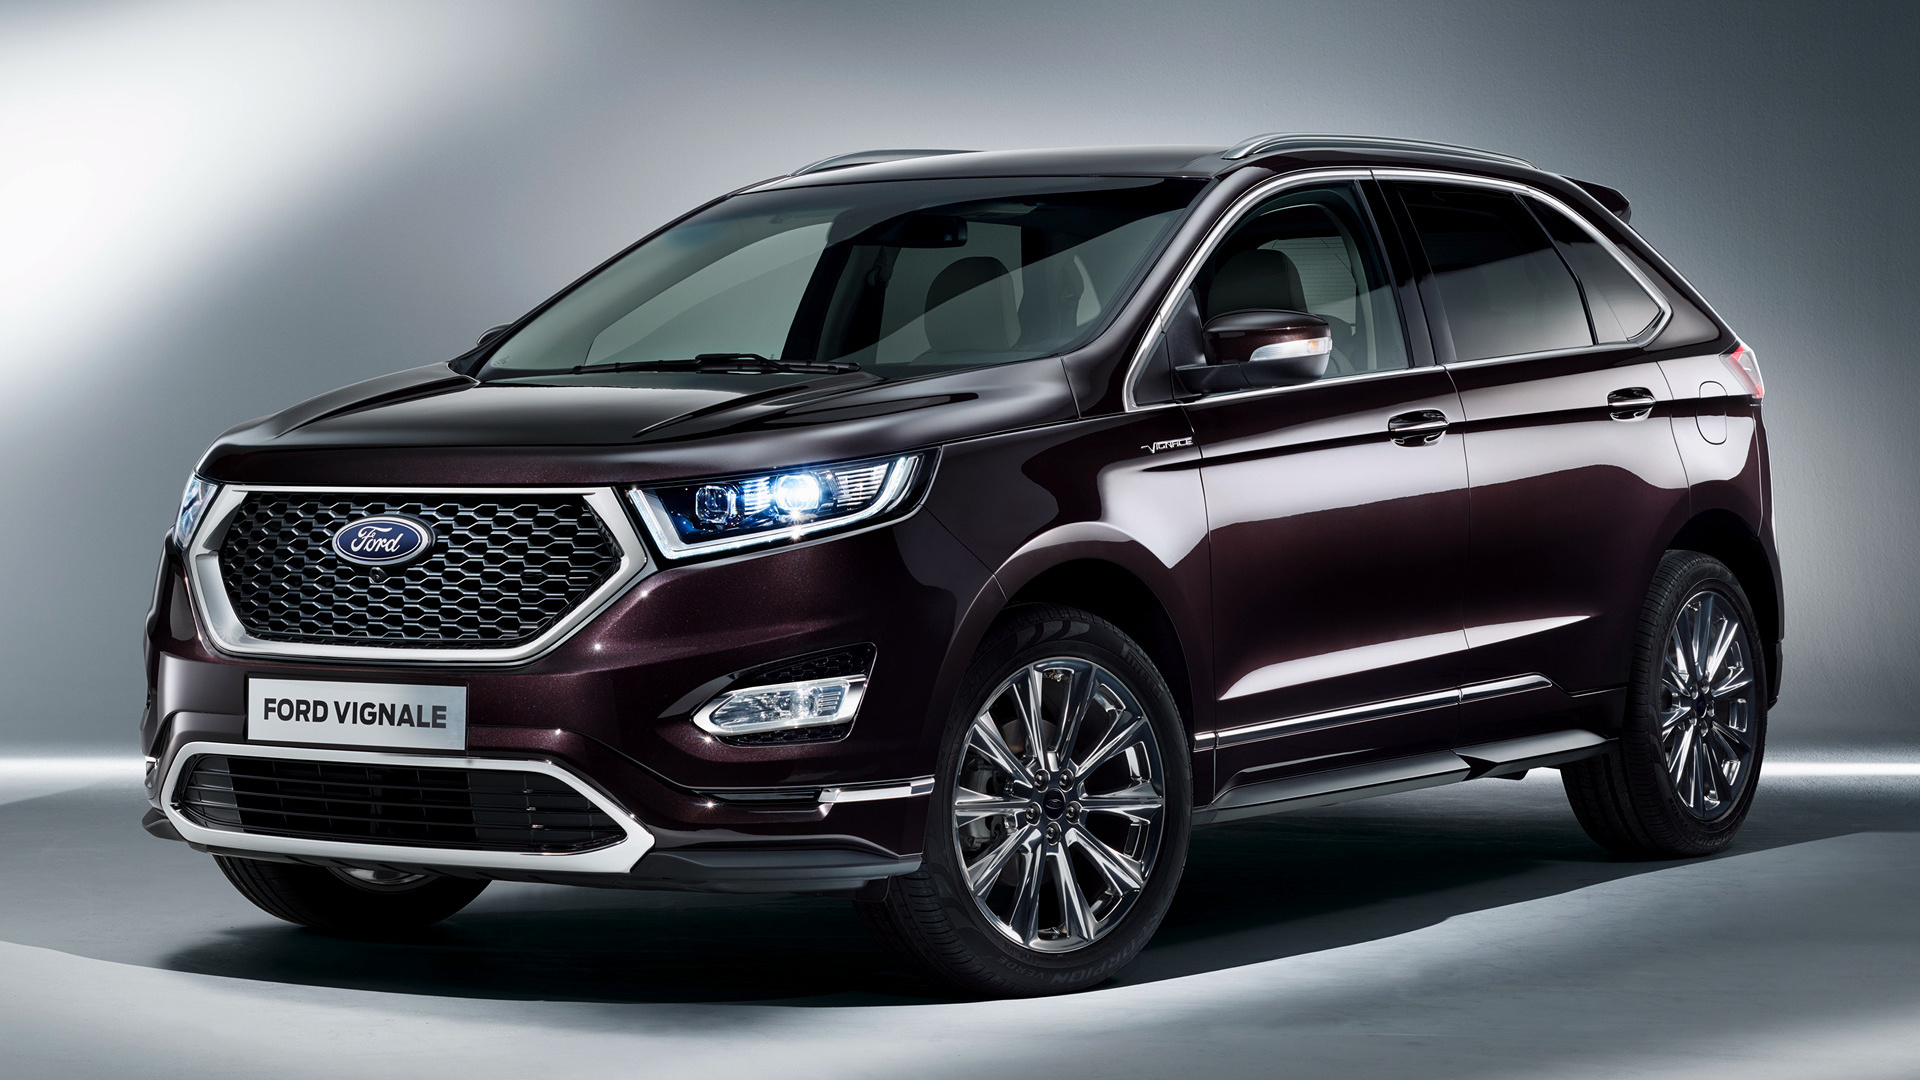 2016 Ford Vignale Edge Wallpapers And Hd Images Car Pixel